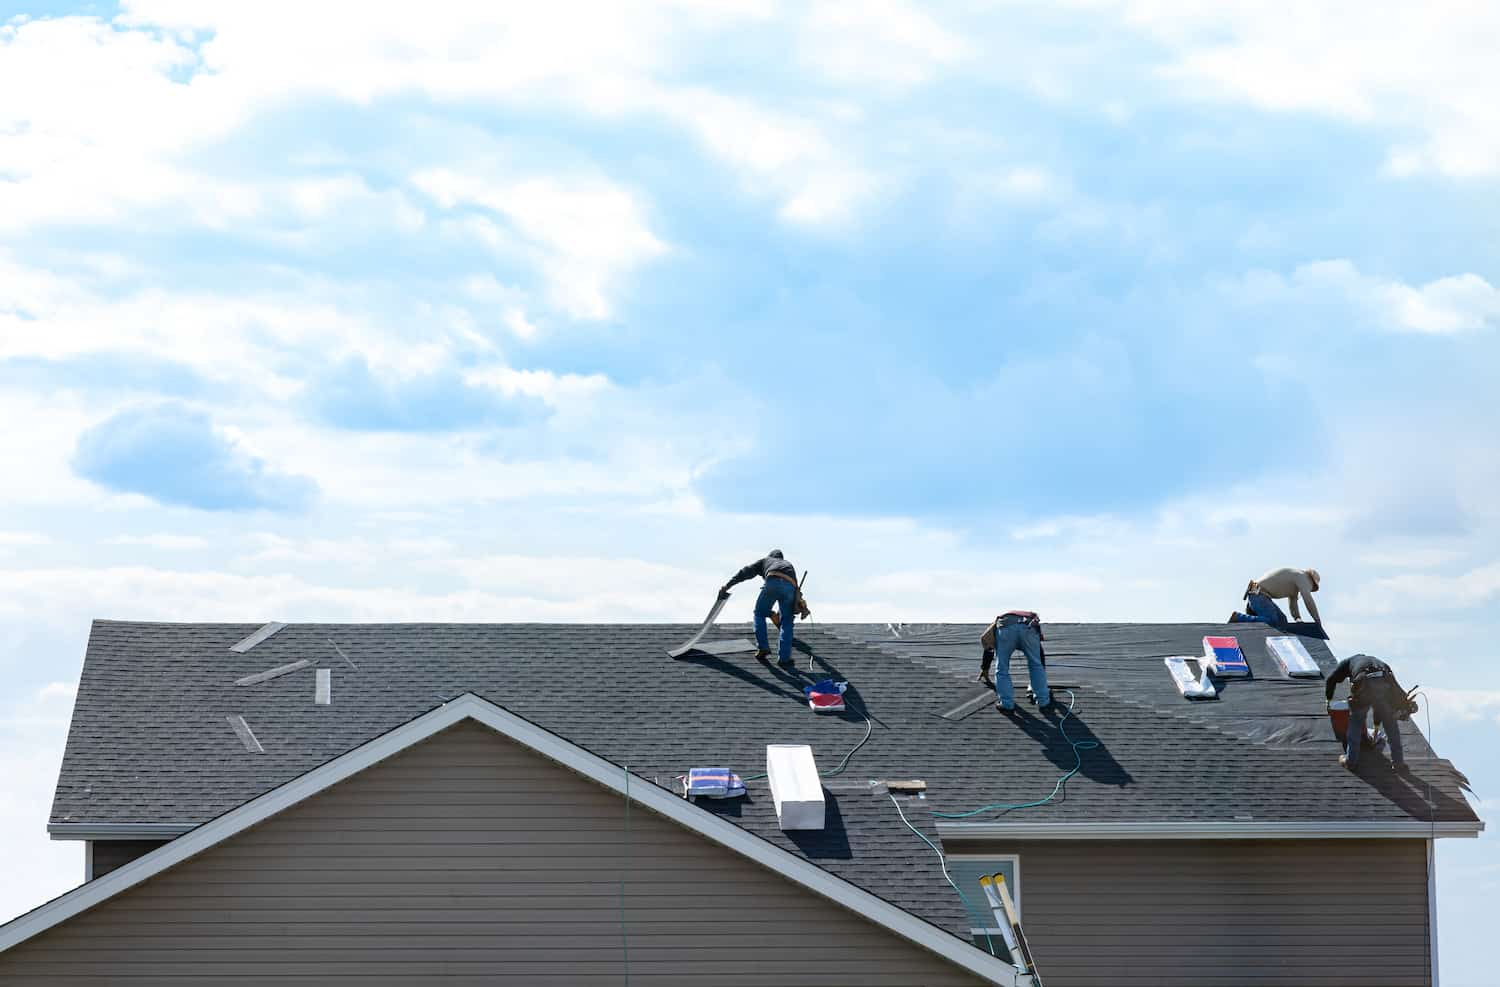 4 construction workers fixing roof against clouds blue sky, install shingles at the top of the house. Renovate, improvement, build home exterior by professional teamwork. Safety and protection concept